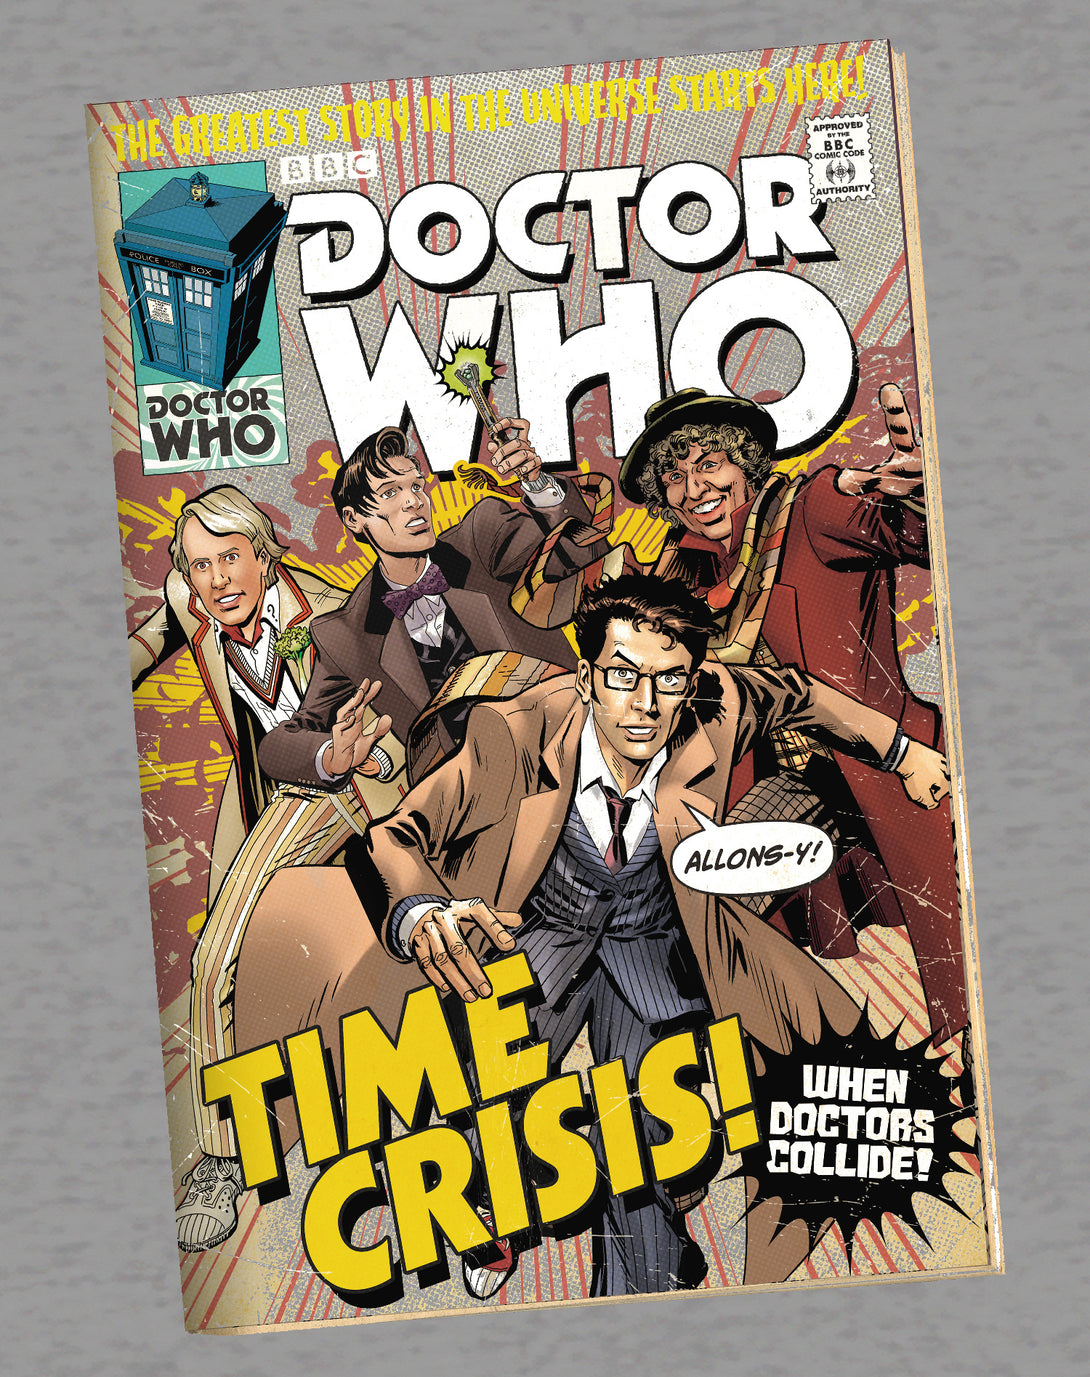 Doctor Who Comic Time Crisis Official Men's T-shirt Sports Grey - Urban Species Design Close Up